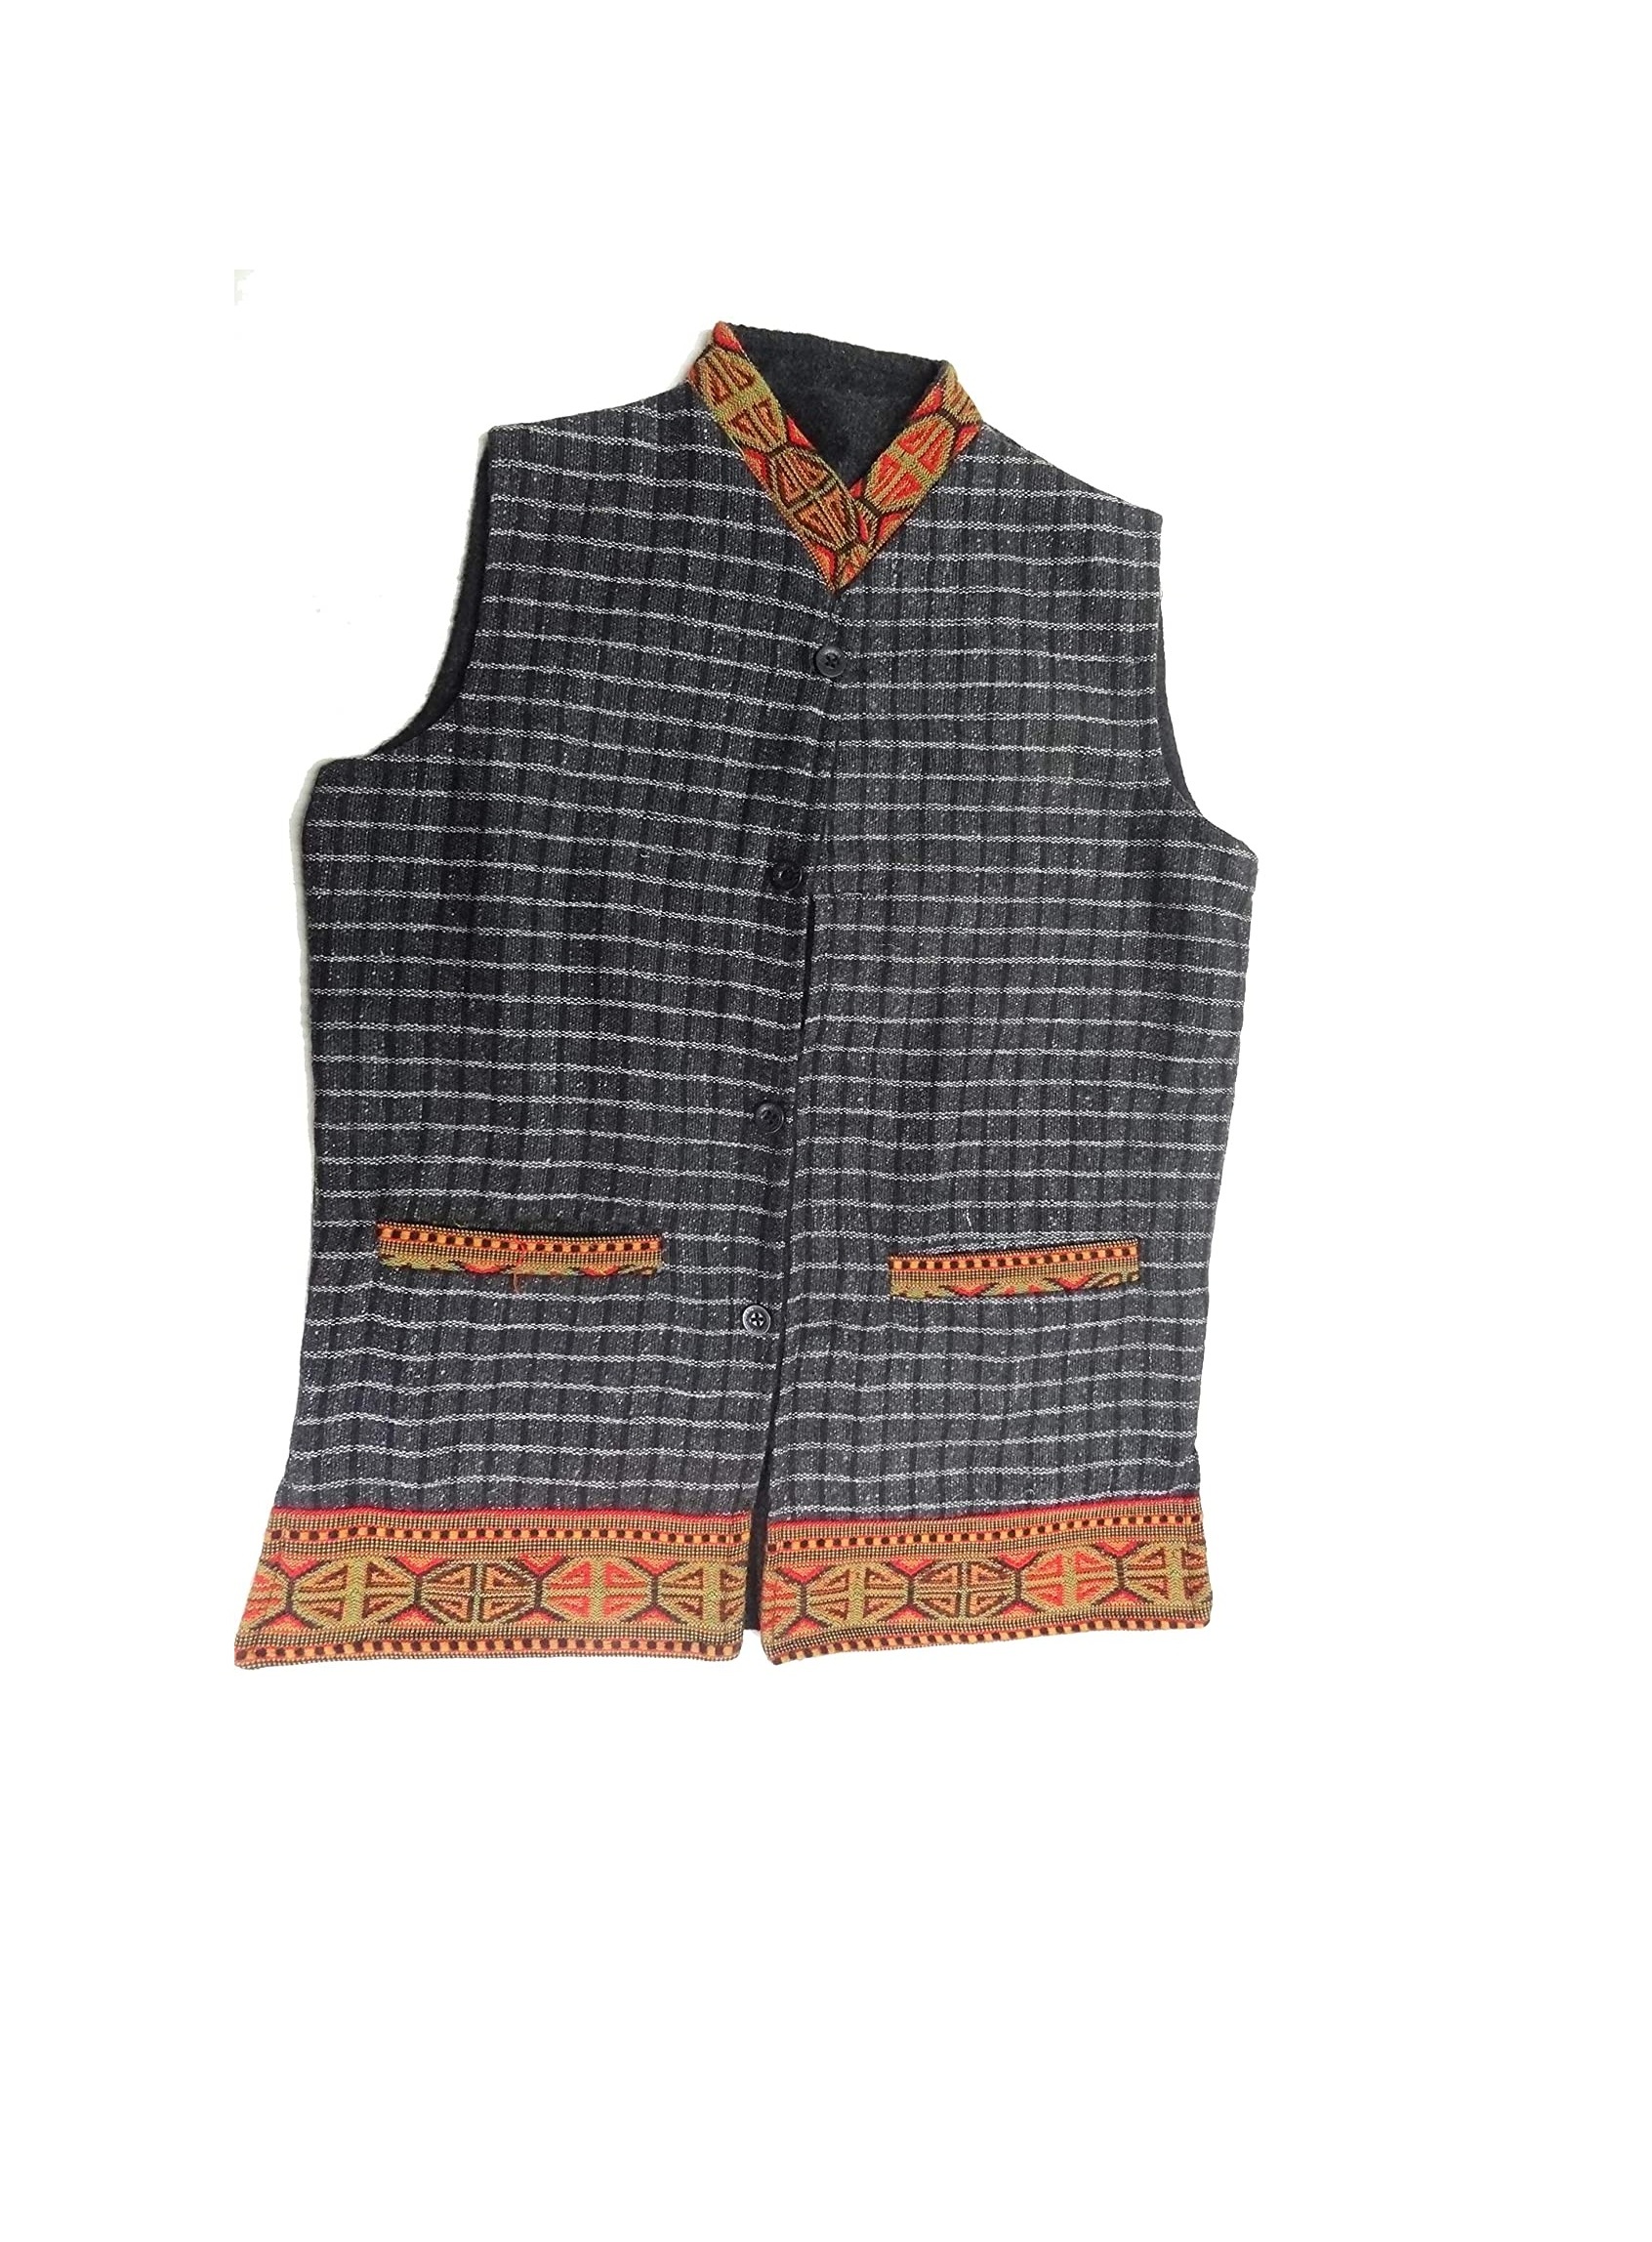 Buy RK Soft and warm half jacket for ladies,girls Online @ ₹599 from  ShopClues-seedfund.vn